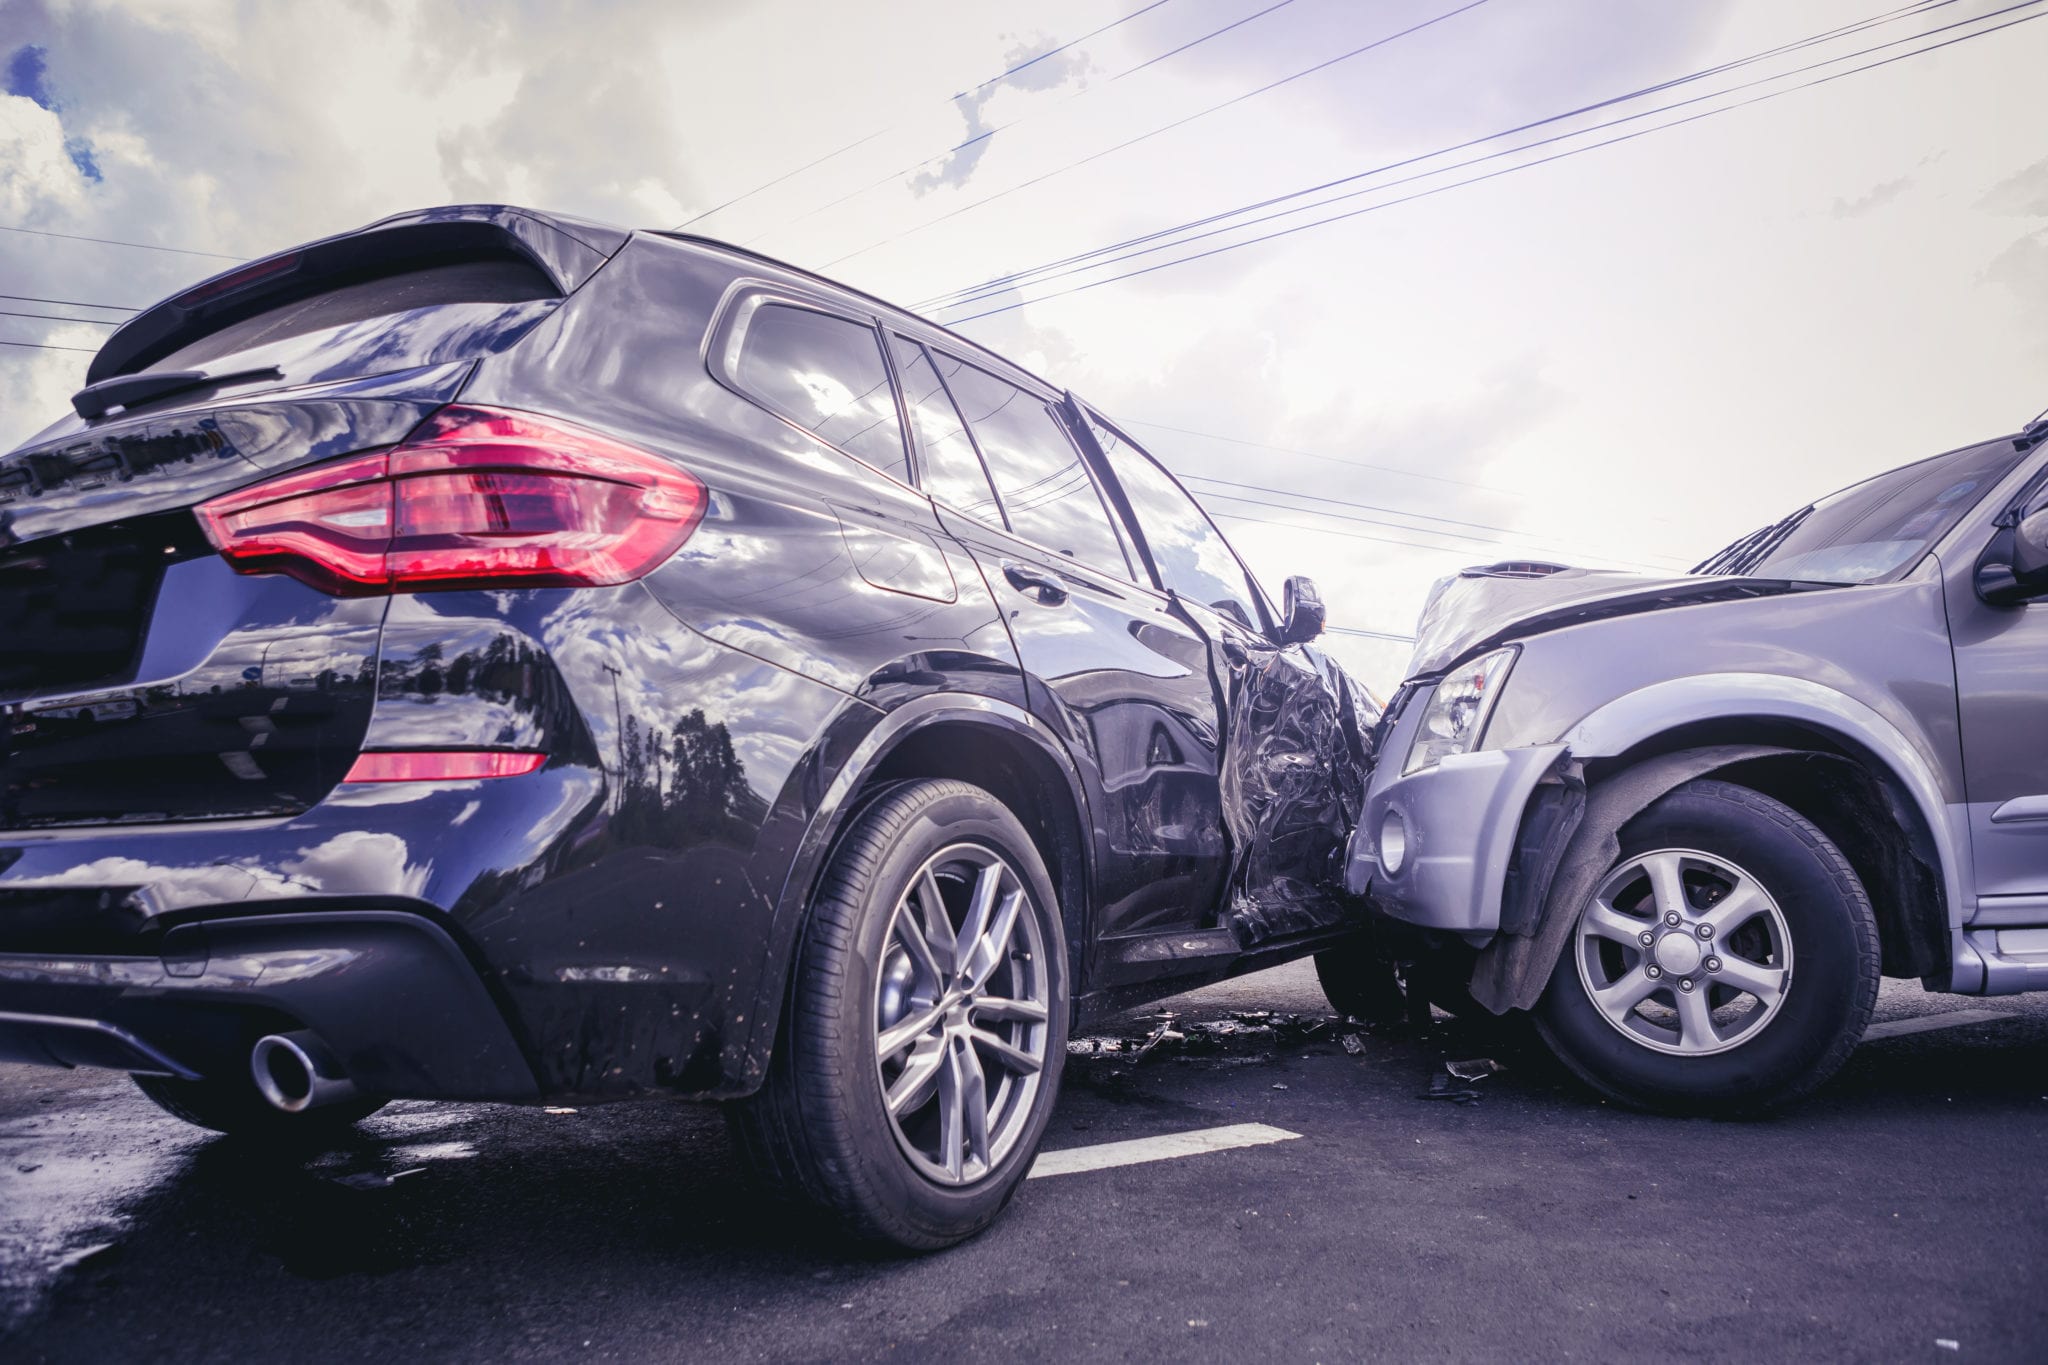 Common Car Accident Injuries - Injuries Sustained After A Car Wreck